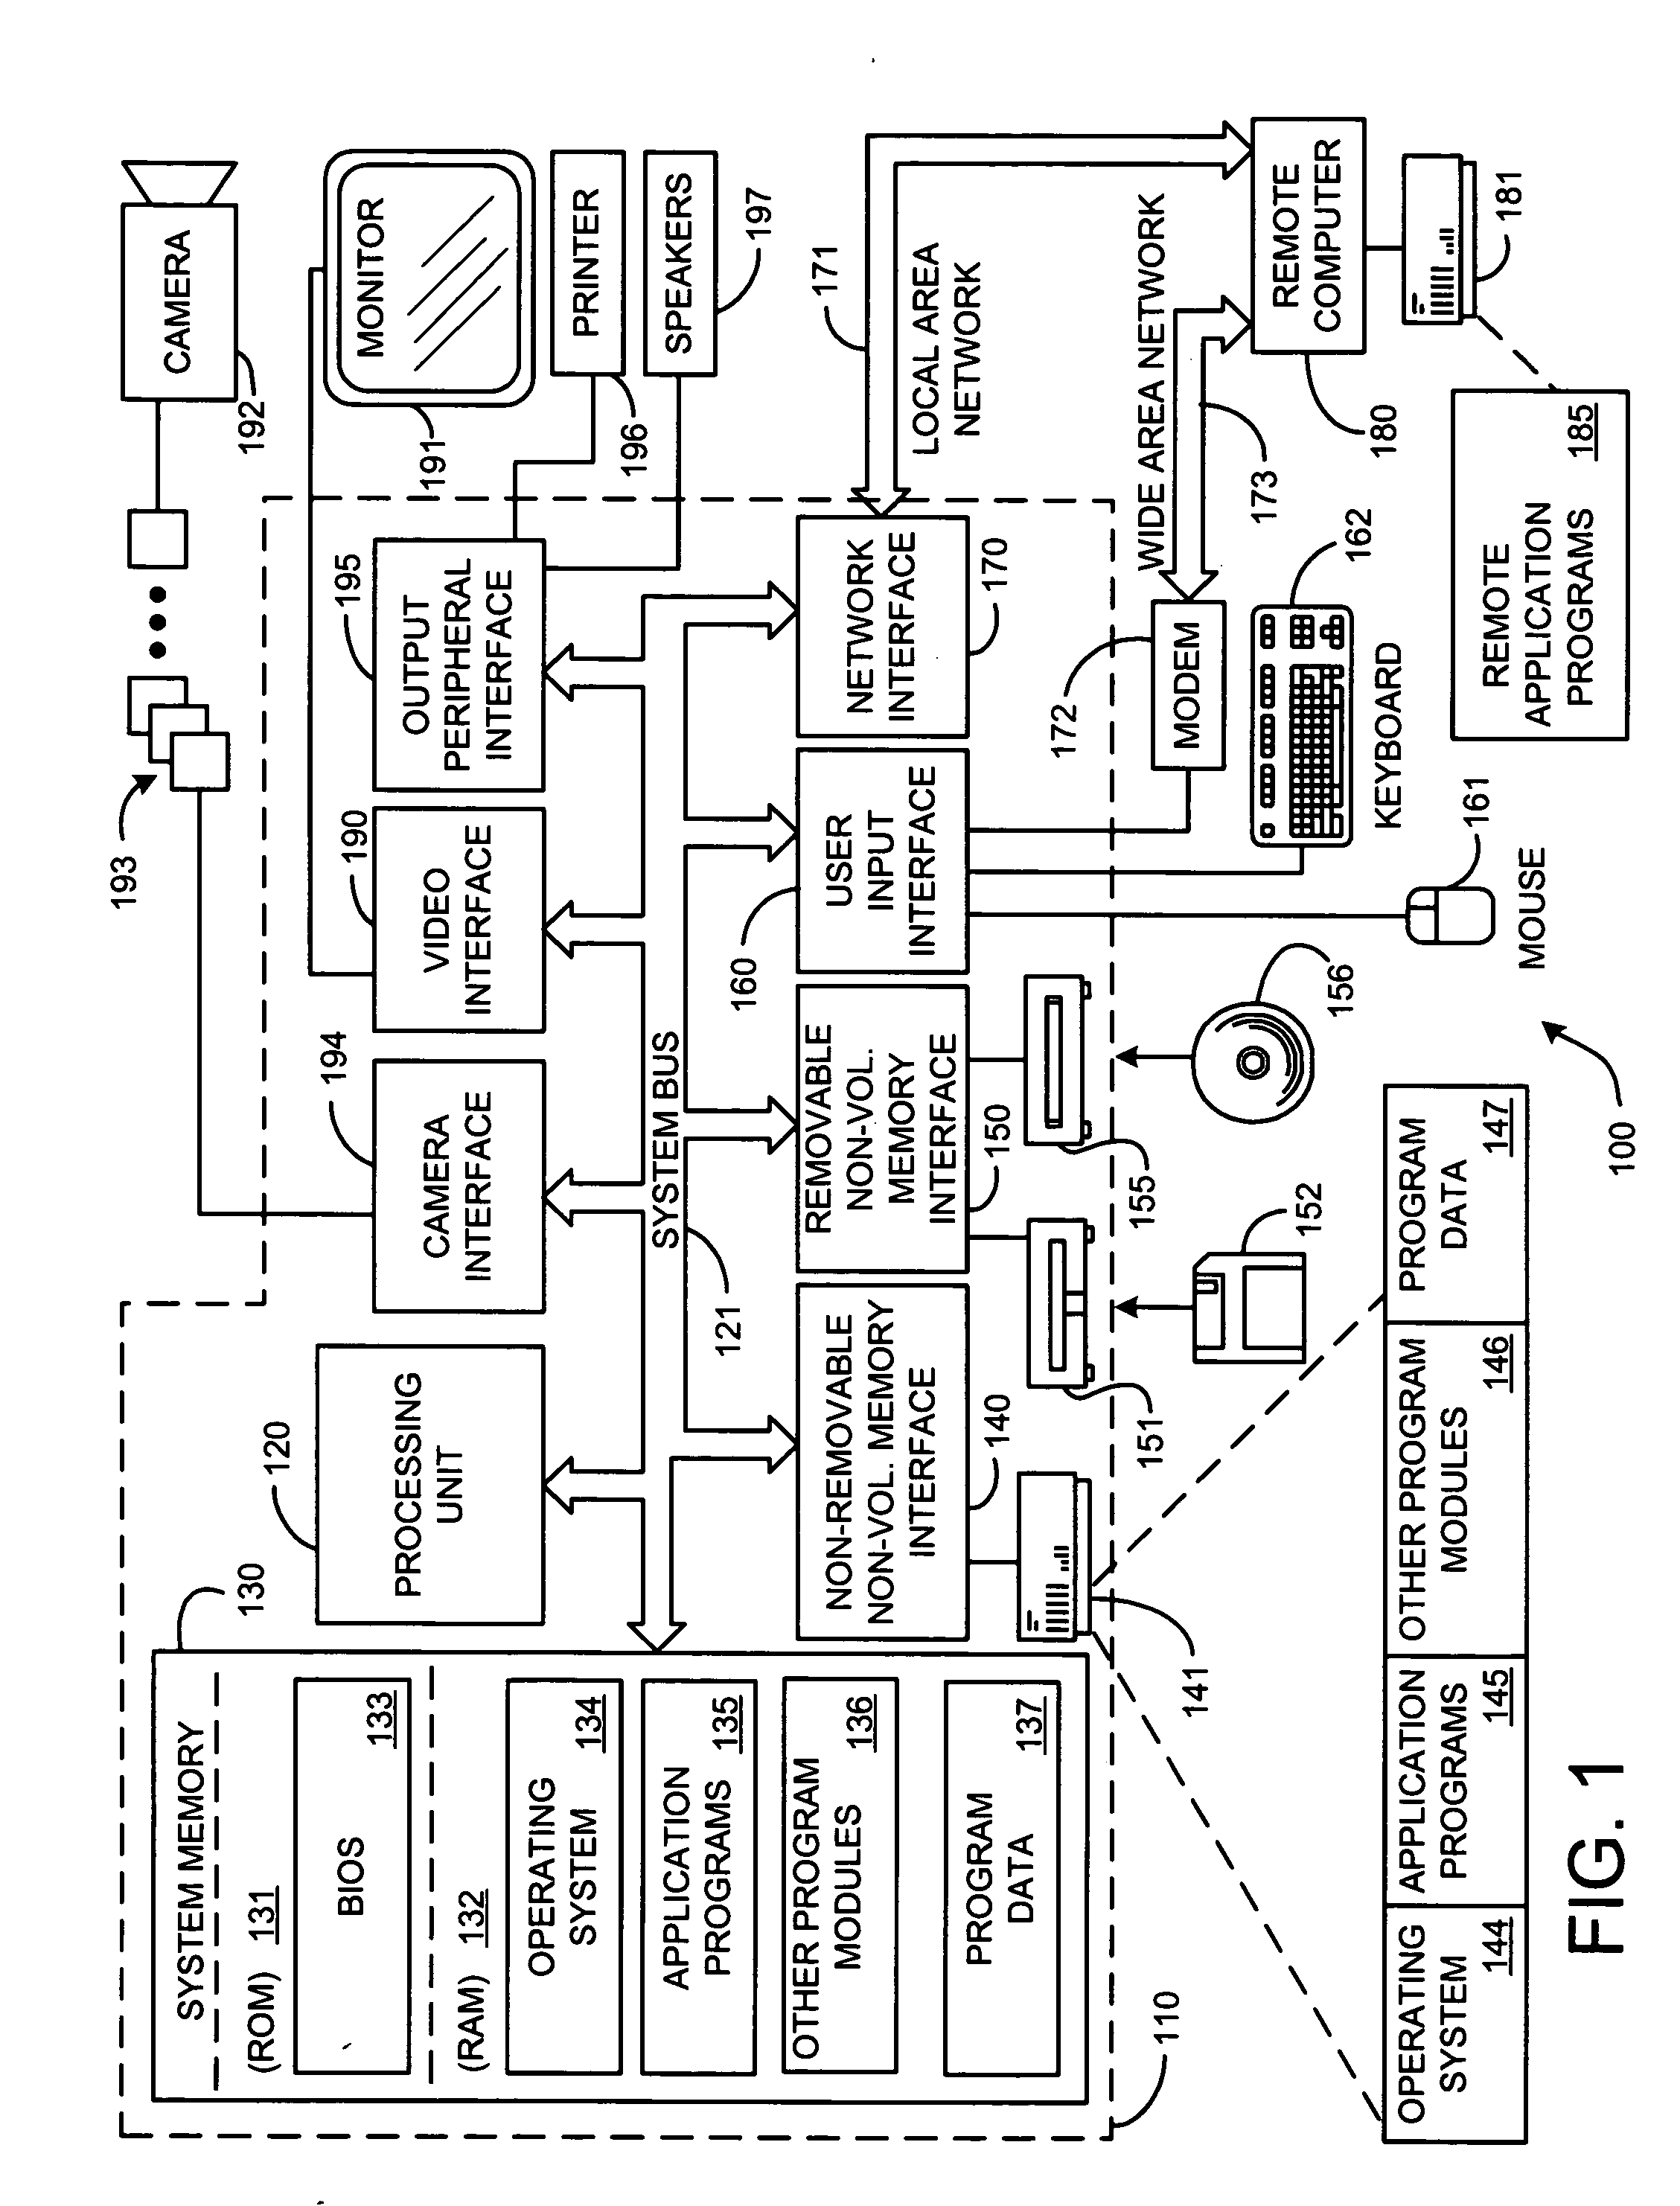 System and method for real-time whiteboard capture and processing